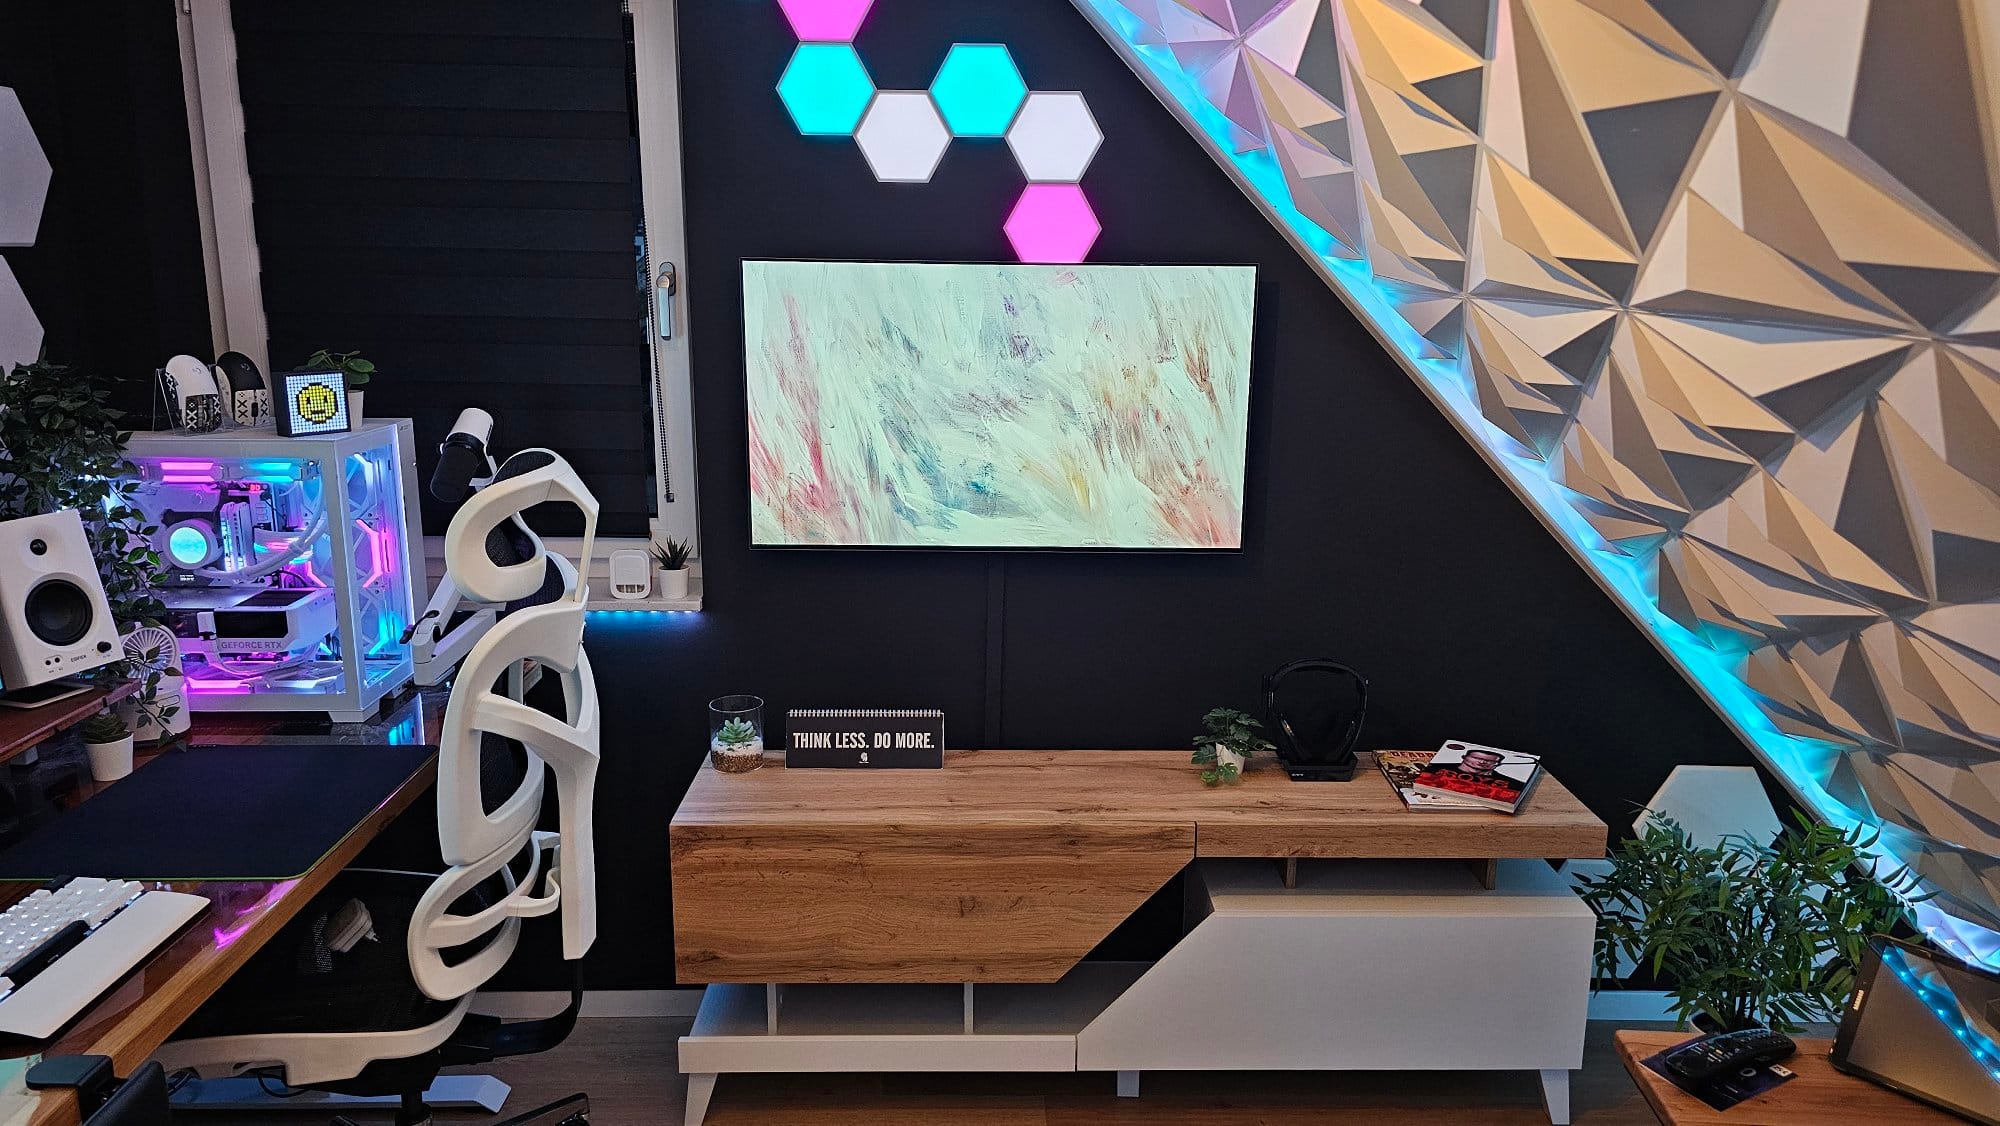 A sleek home office setup with an abstract painting on the wall, an illuminated geometric panel, a white ergonomic chair, and a wooden desk with a motivational sign, surrounded by ambient lighting and modern technology